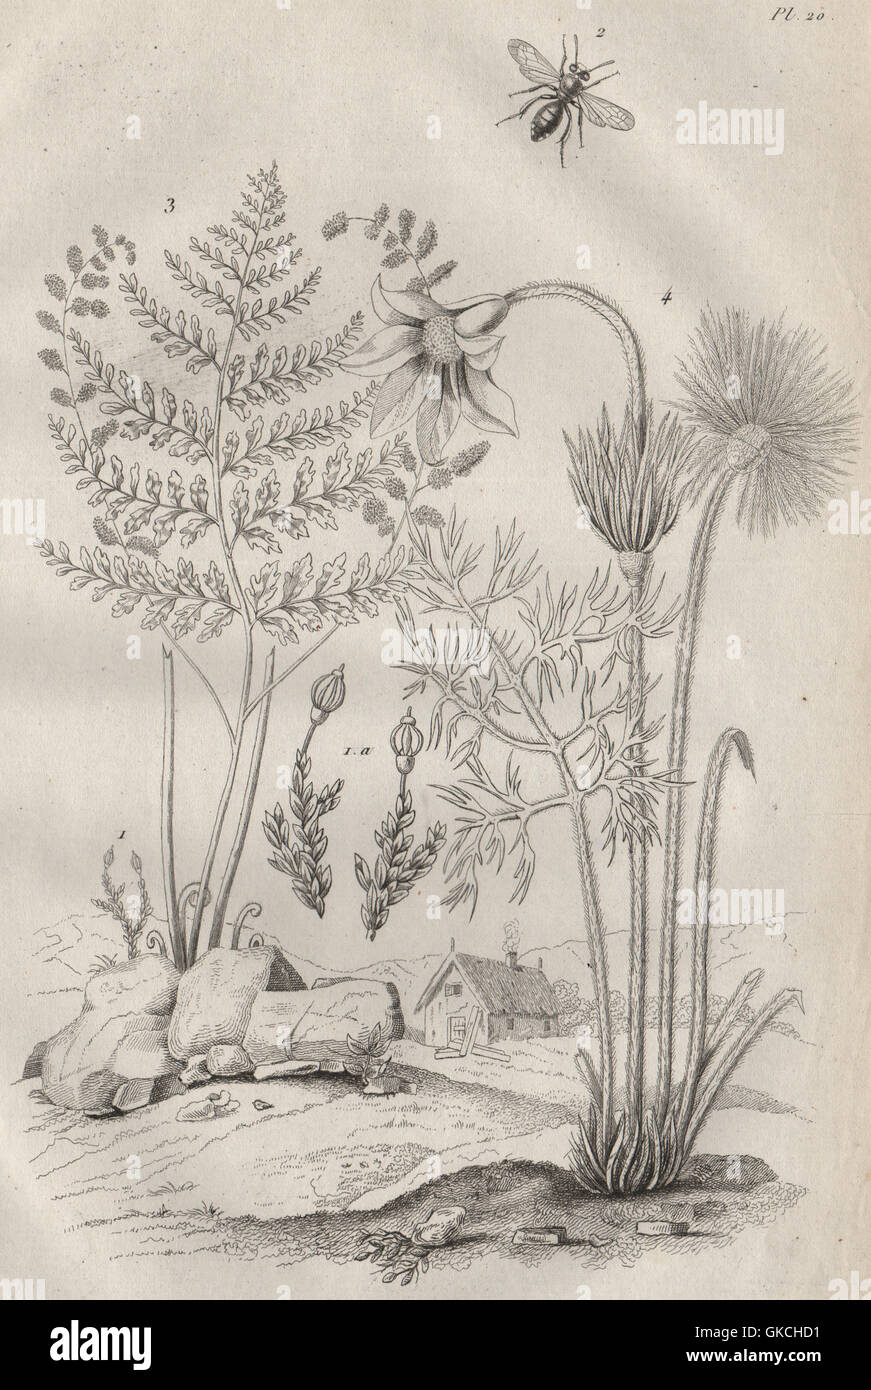 PLANTS: Andrée. Andrena bee. Anemia fern. Anemone, antique print 1834 Stock Photo